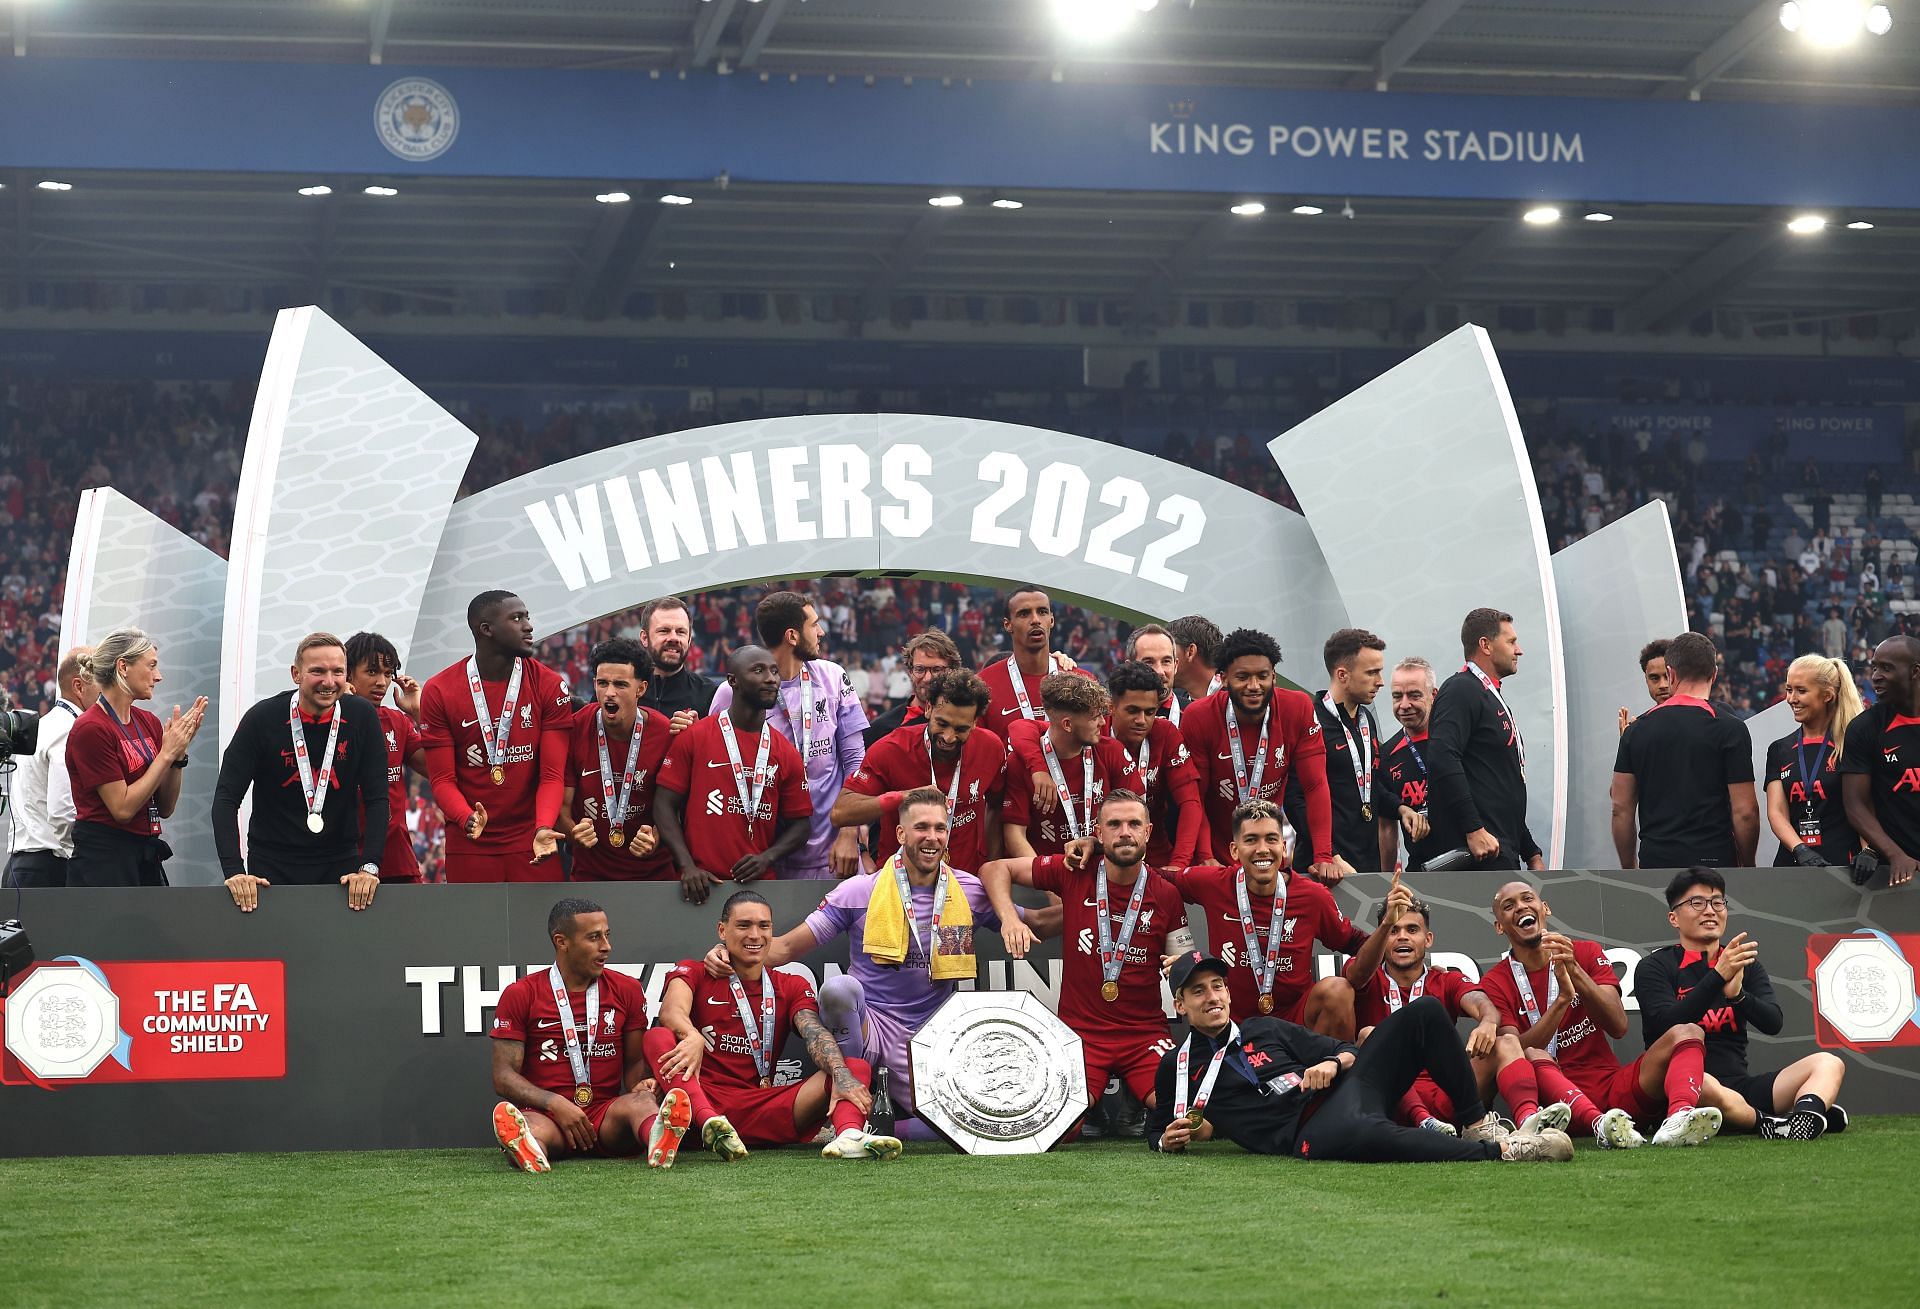 The Reds are the FA Community Shield 2022 champions